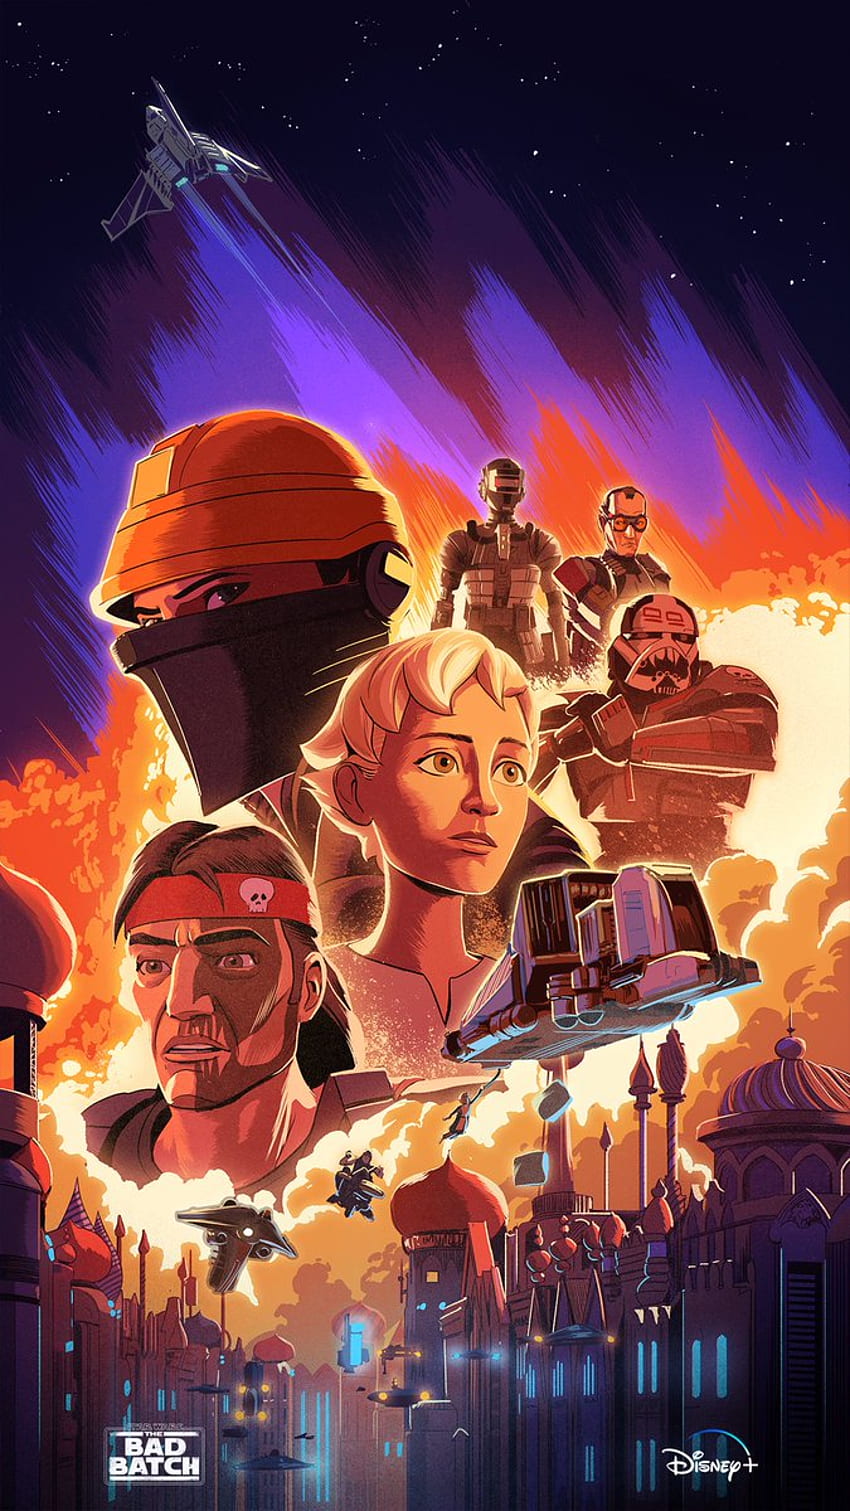 Star Wars: The Bad Batch - Keep your favorite characters close with two new mobile inspired by HD phone wallpaper